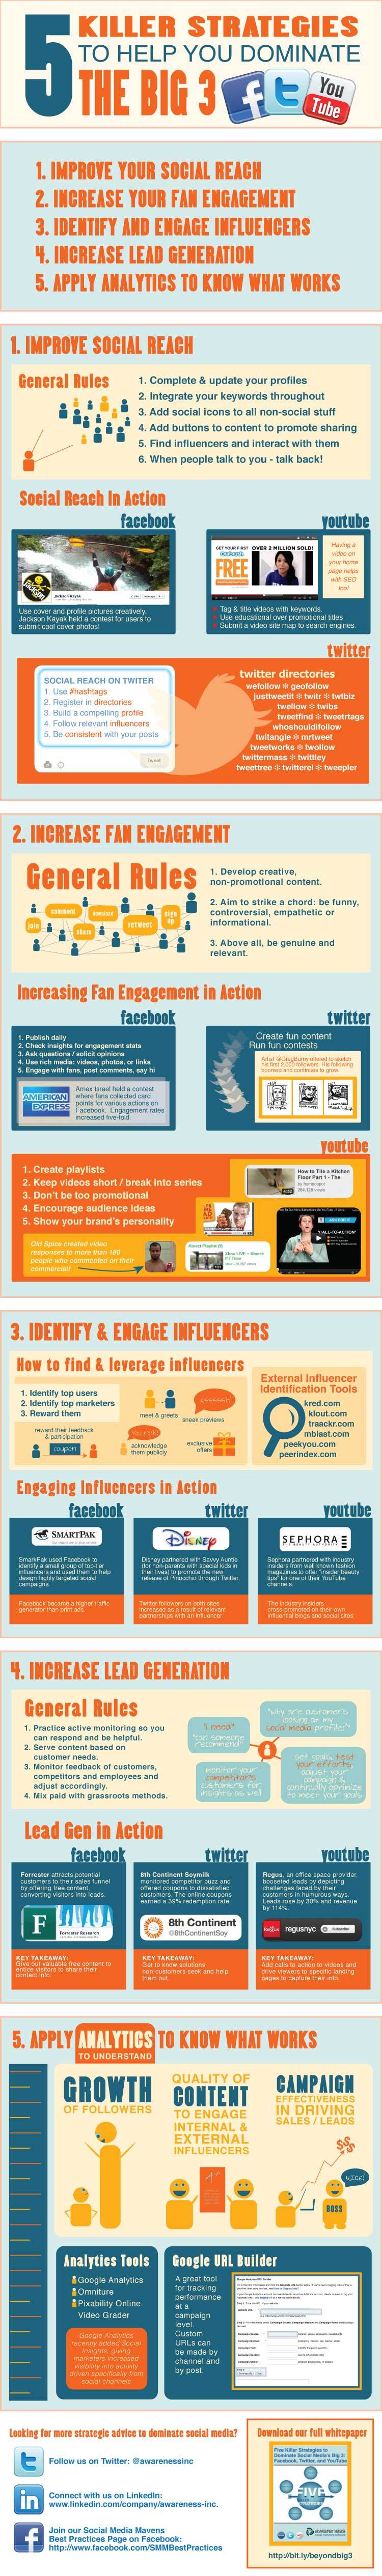 5-Strategies-to-Dominate-Facebook-Twitter-YouTube 2